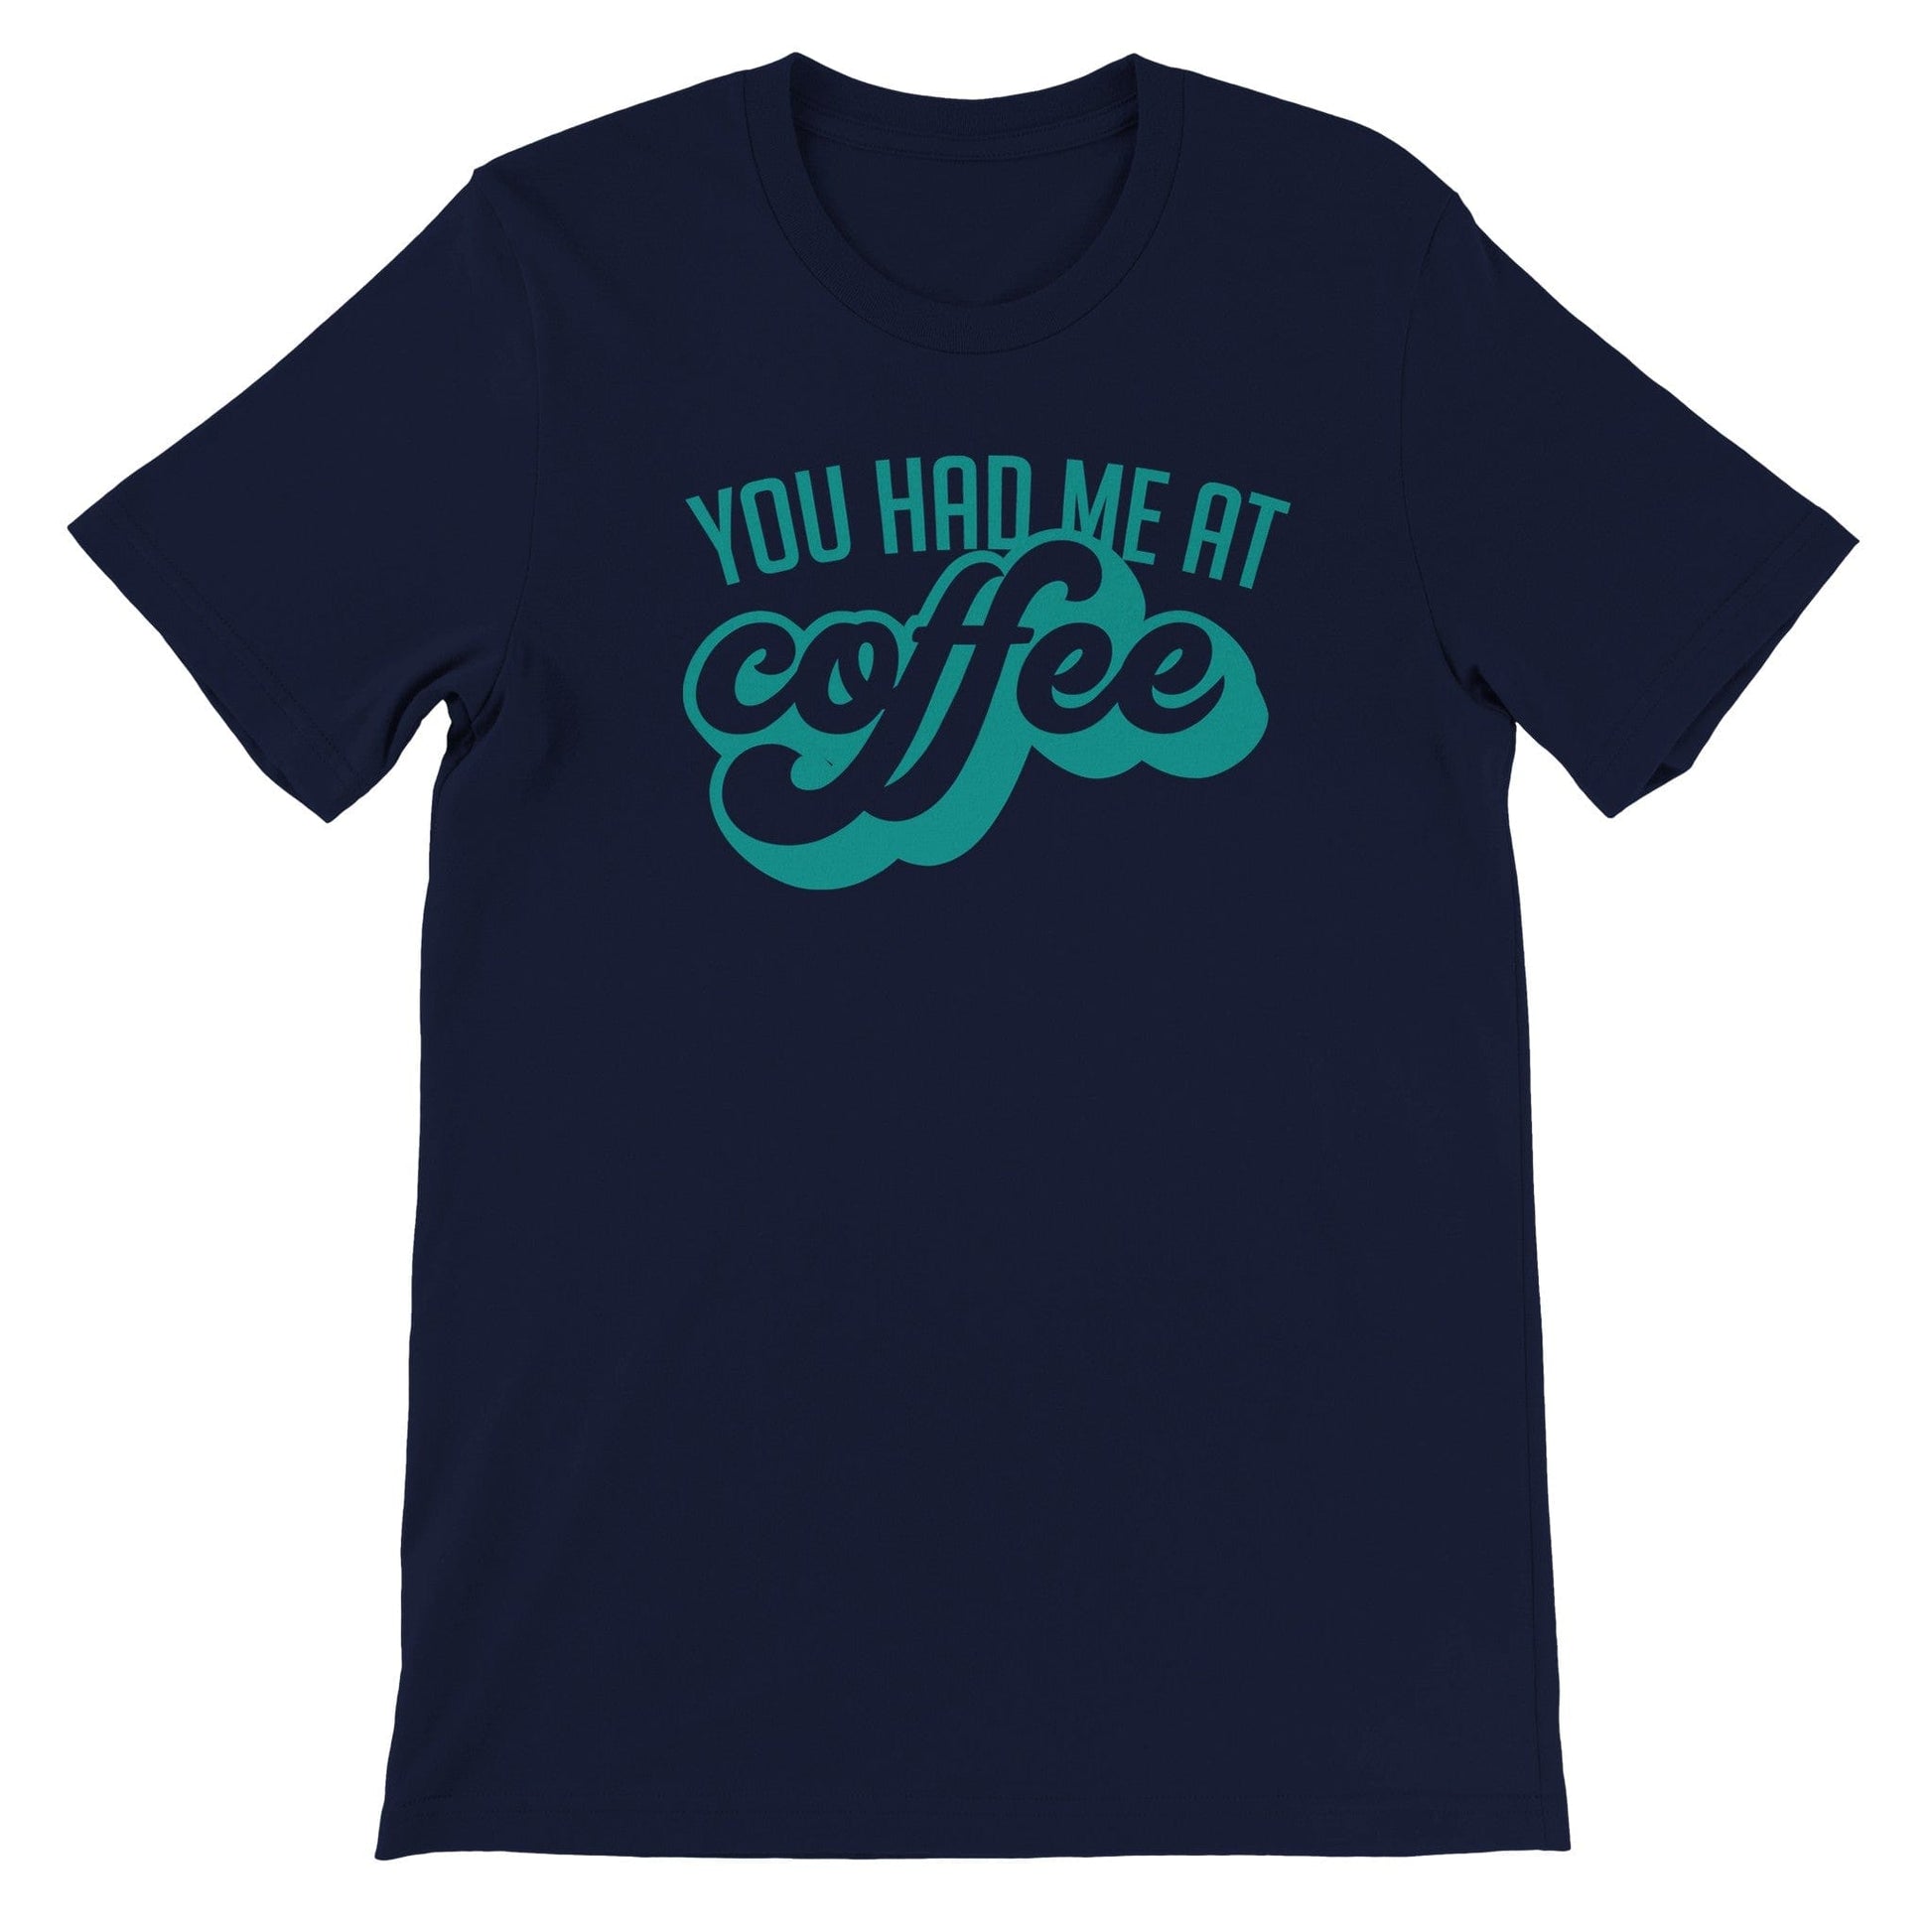 Good Bean Gifts "You Had Me at Coffee" - Unisex Crewneck T-shirt Navy / S